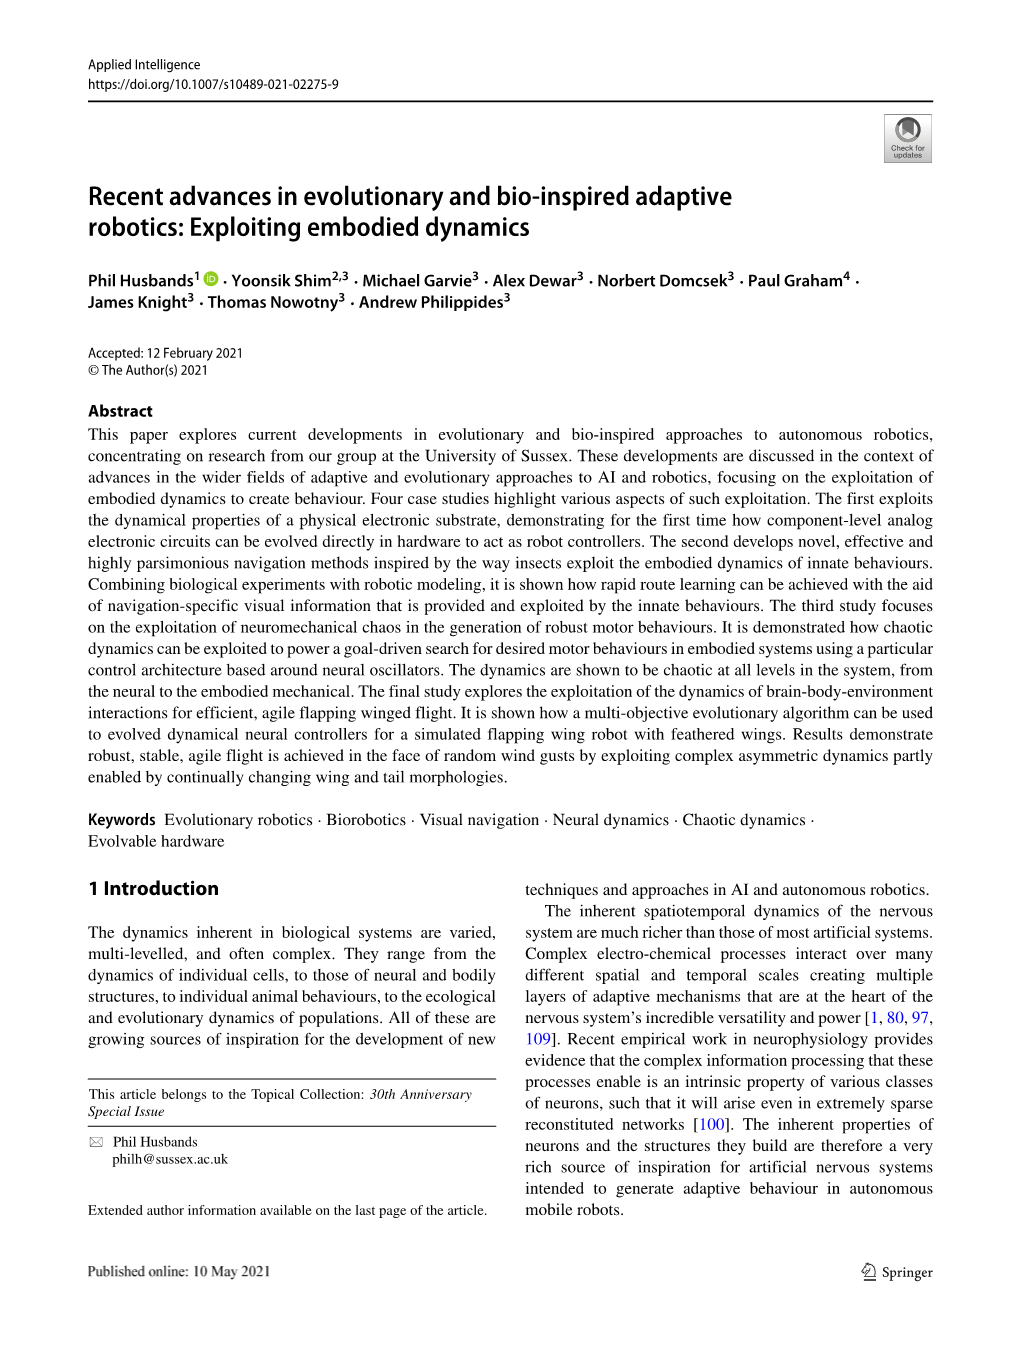 Recent Advances in Evolutionary and Bio-Inspired Adaptive Robotics: Exploiting Embodied Dynamics